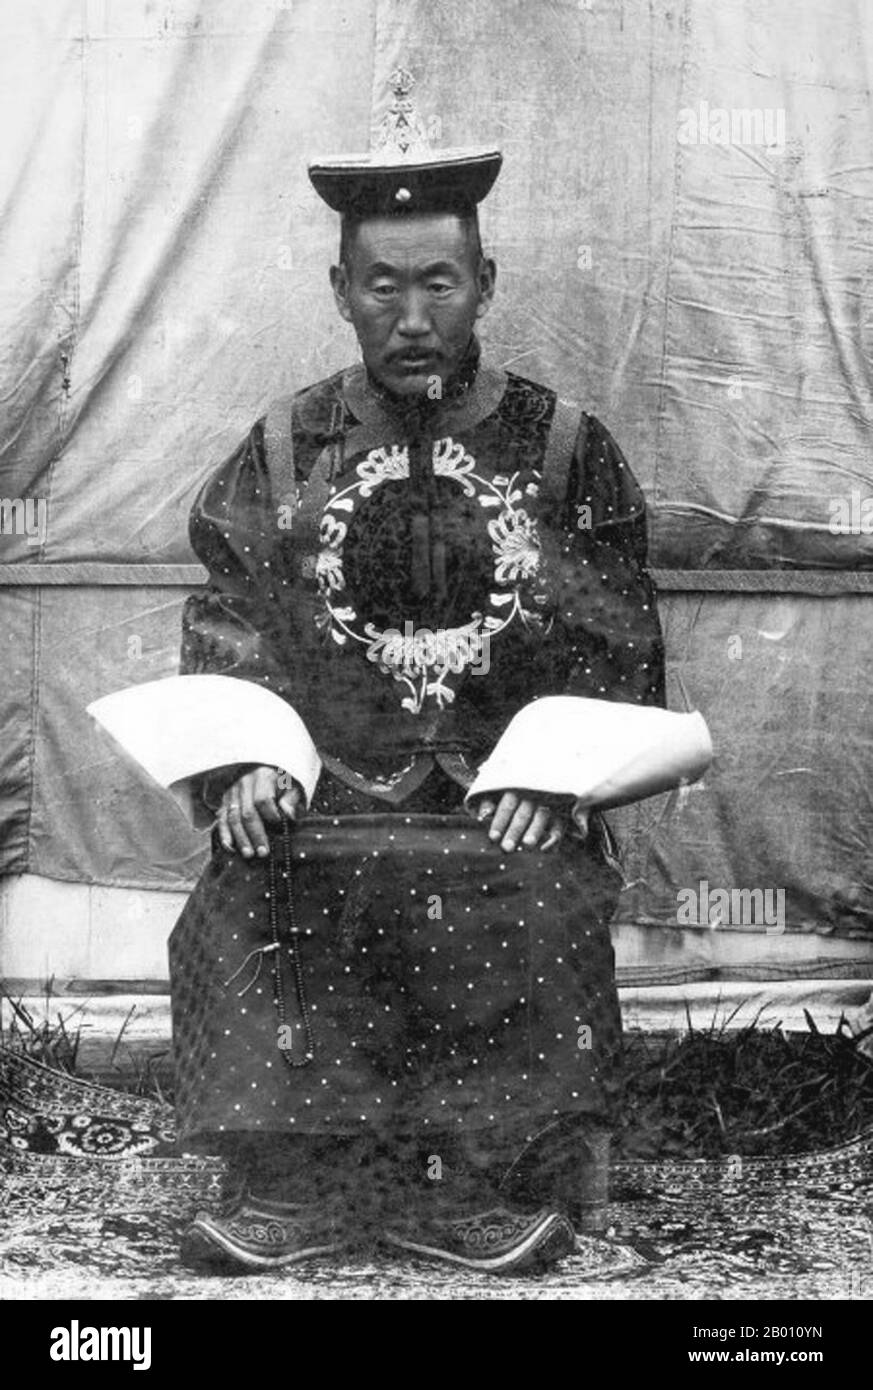 Mongolia: Jalkhanz Khutagt Sodnomyn Damdinbazar (1874–1923) was a high lamaist incarnation in northwestern Mongolia, and played a high-profile role in the country's independence movement.  He served as Prime Minister twice, 1921 in Baron Ungern's puppet government, and 1922/23 under the MPRP. Damdinbazar was born in 1874 at Lake Oigon Nuur in the Nömrög district of present-day Zavkhan Aimag. His father Tserensodnom and mother Sonom were middle-class herders. In 1877 he was inaugurated as Jalkhanz Khutagt at Jalkhanzyn Khüree, in what is today Bürentogtokh Sum in Khövsgöl Aimag. Stock Photo